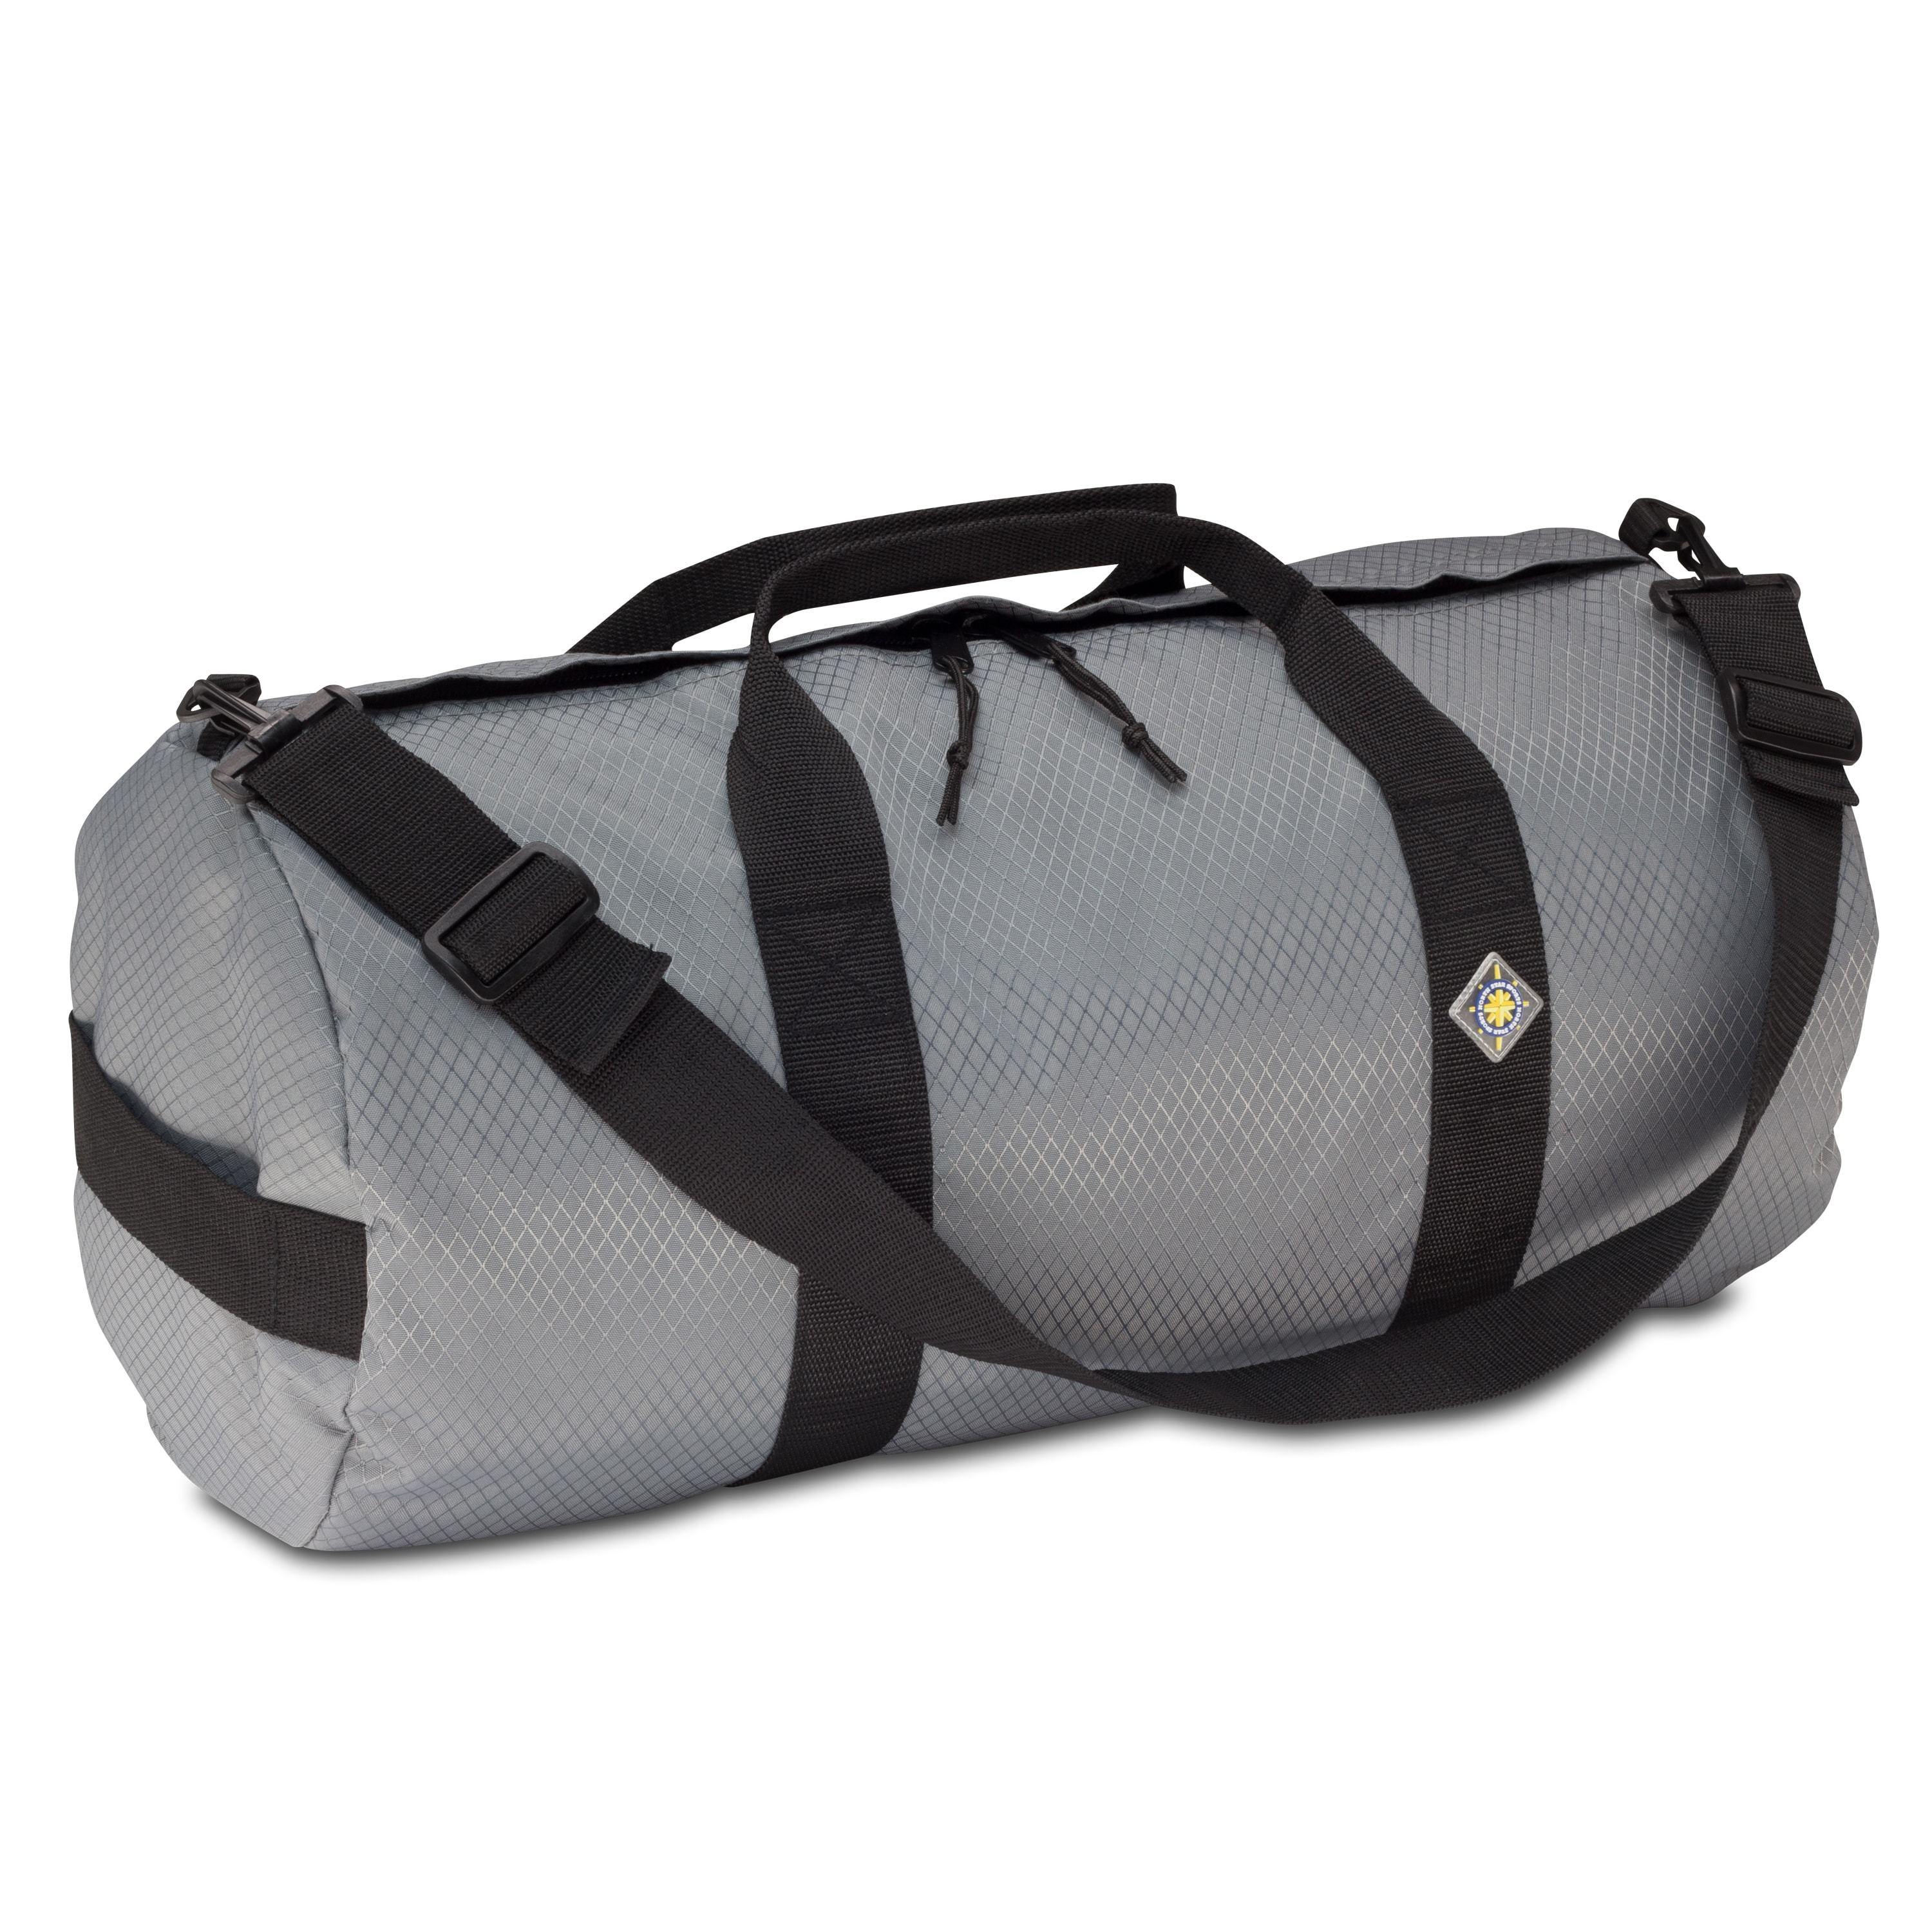 Studio photo the Steel Grey SD1224DLX Standard Duffle by Northstar Bags. 44 liter duffel with diamond ripstop fabric, thick webbing straps, and a large format metal zipper. Guaranteed for life.